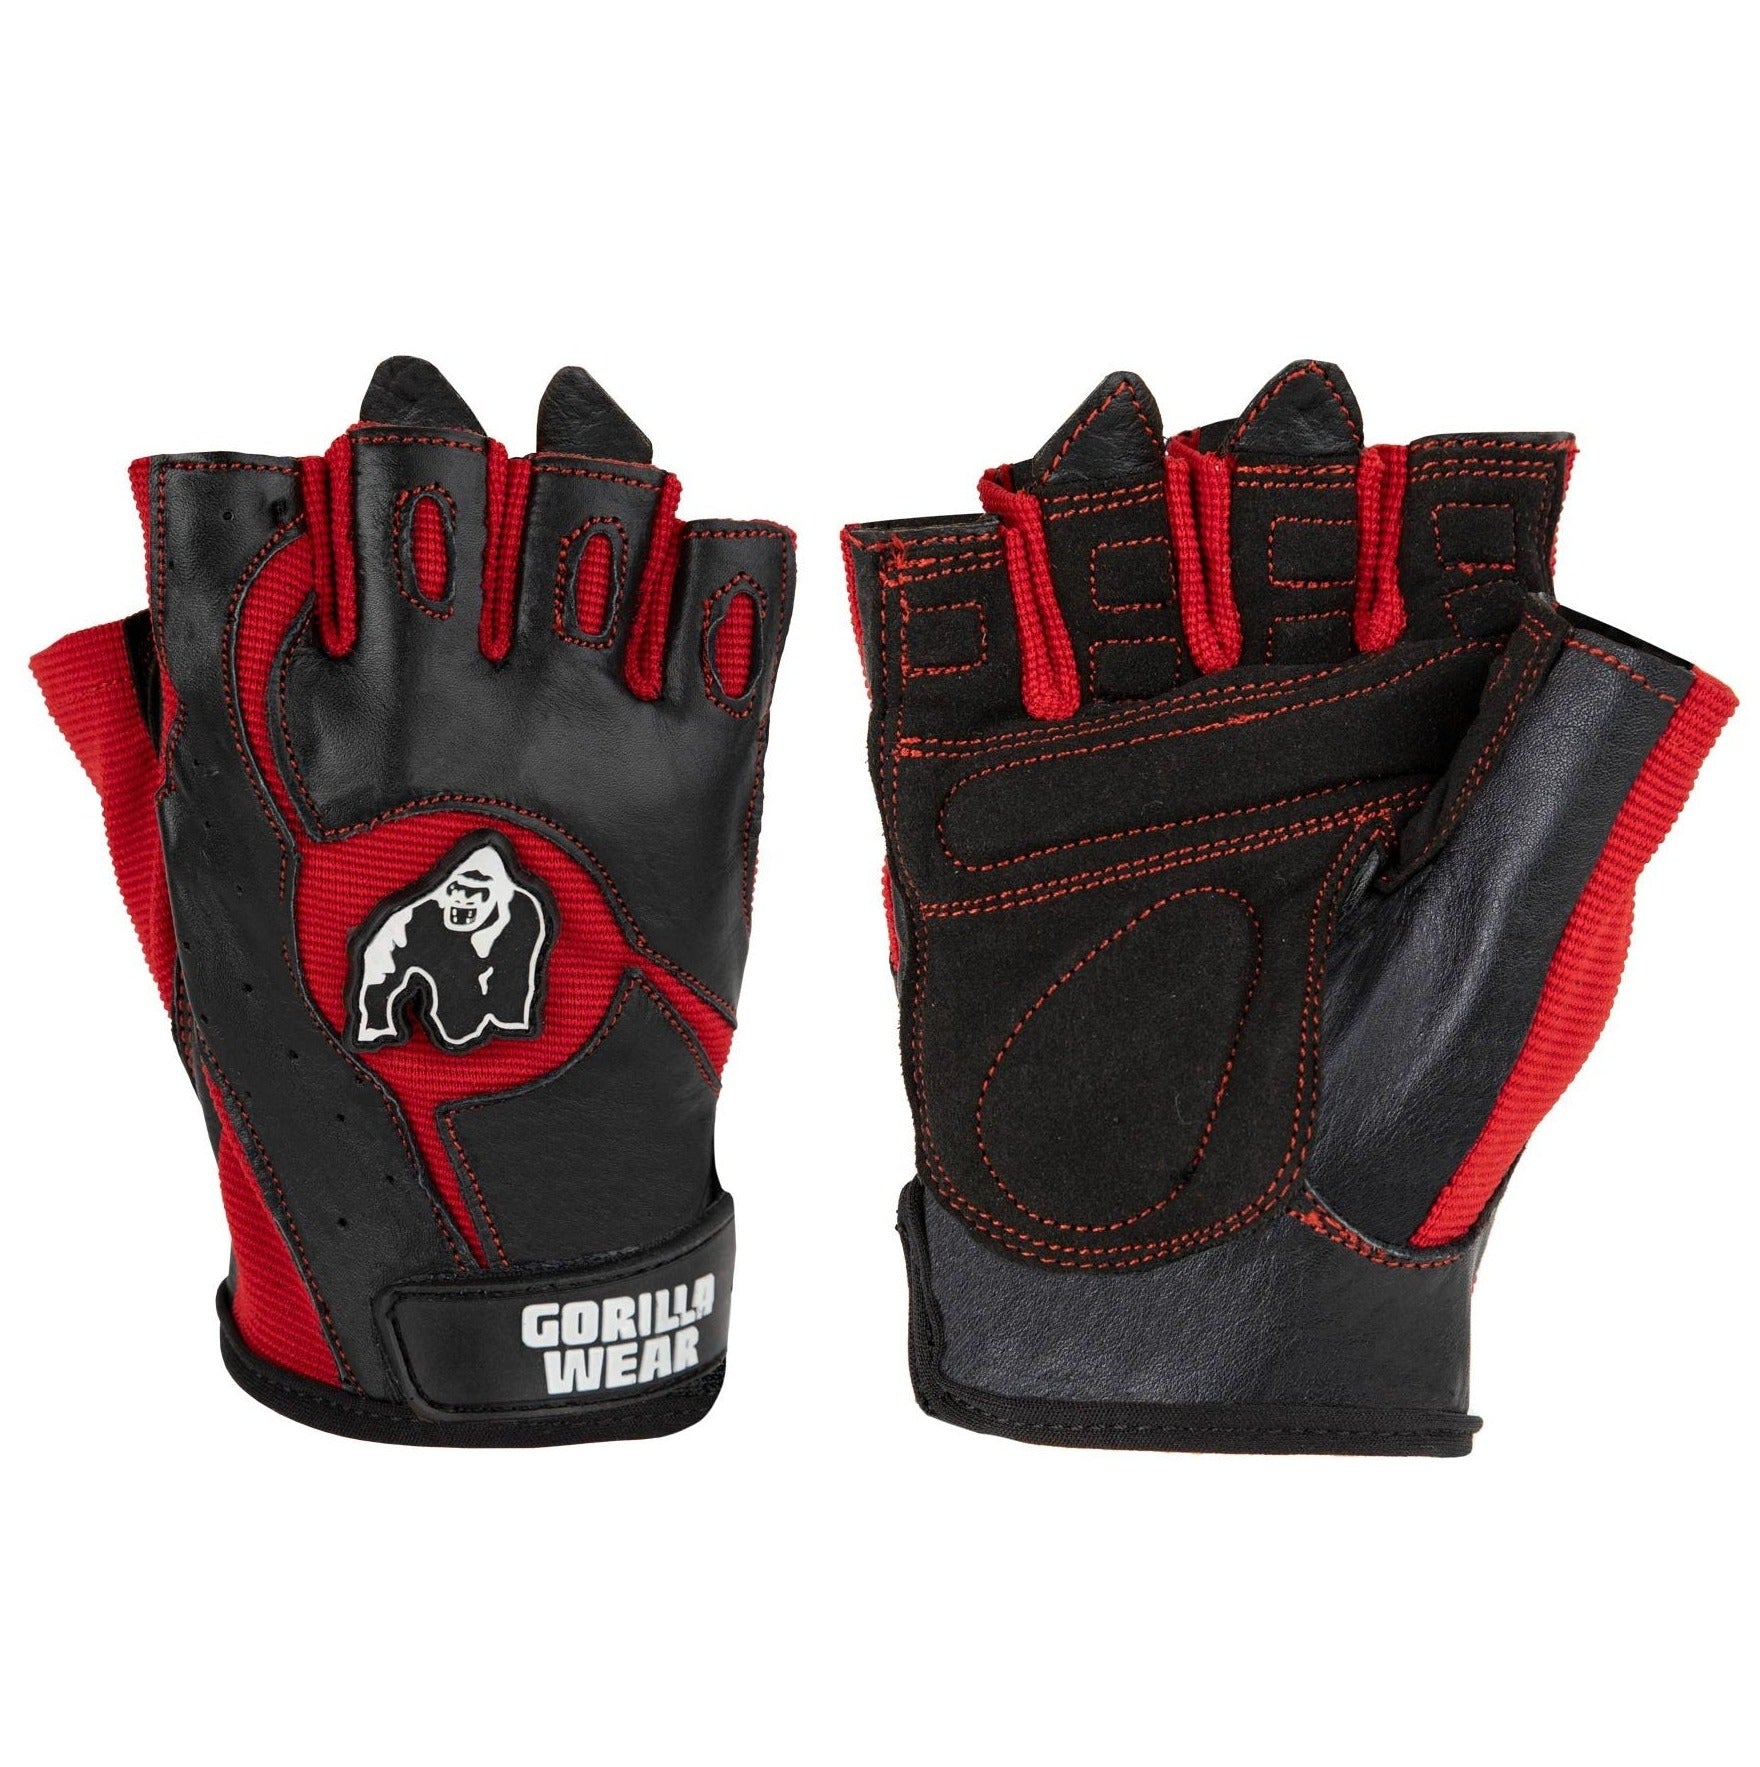 Quality Workout Gloves & Lifting Grips - Gorilla Wear